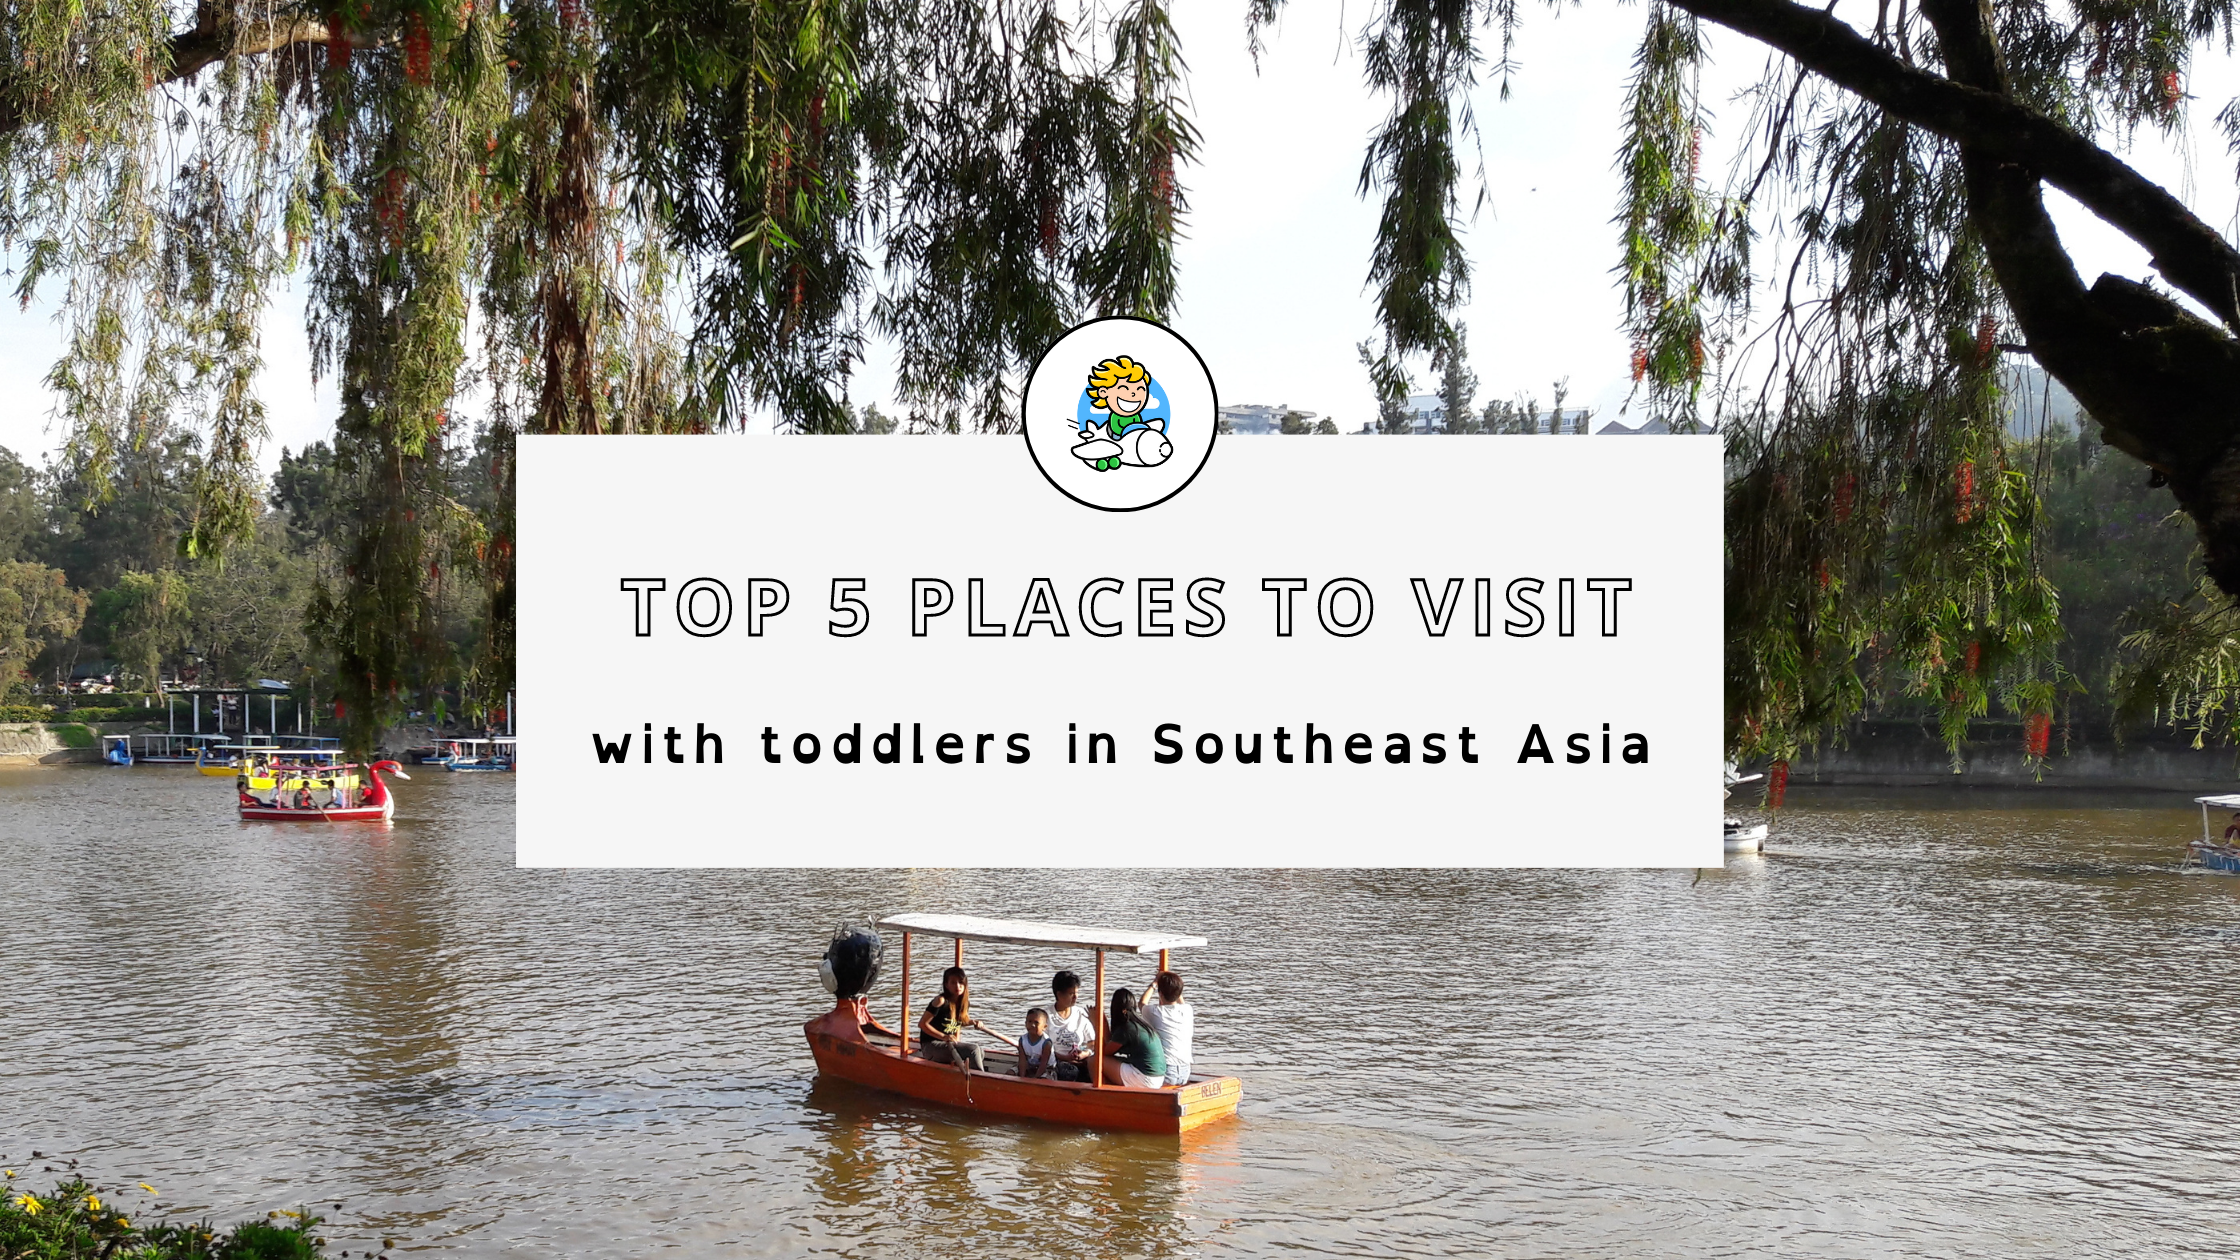 Top 5 Places to Visit with Toddlers in Southeast Asia